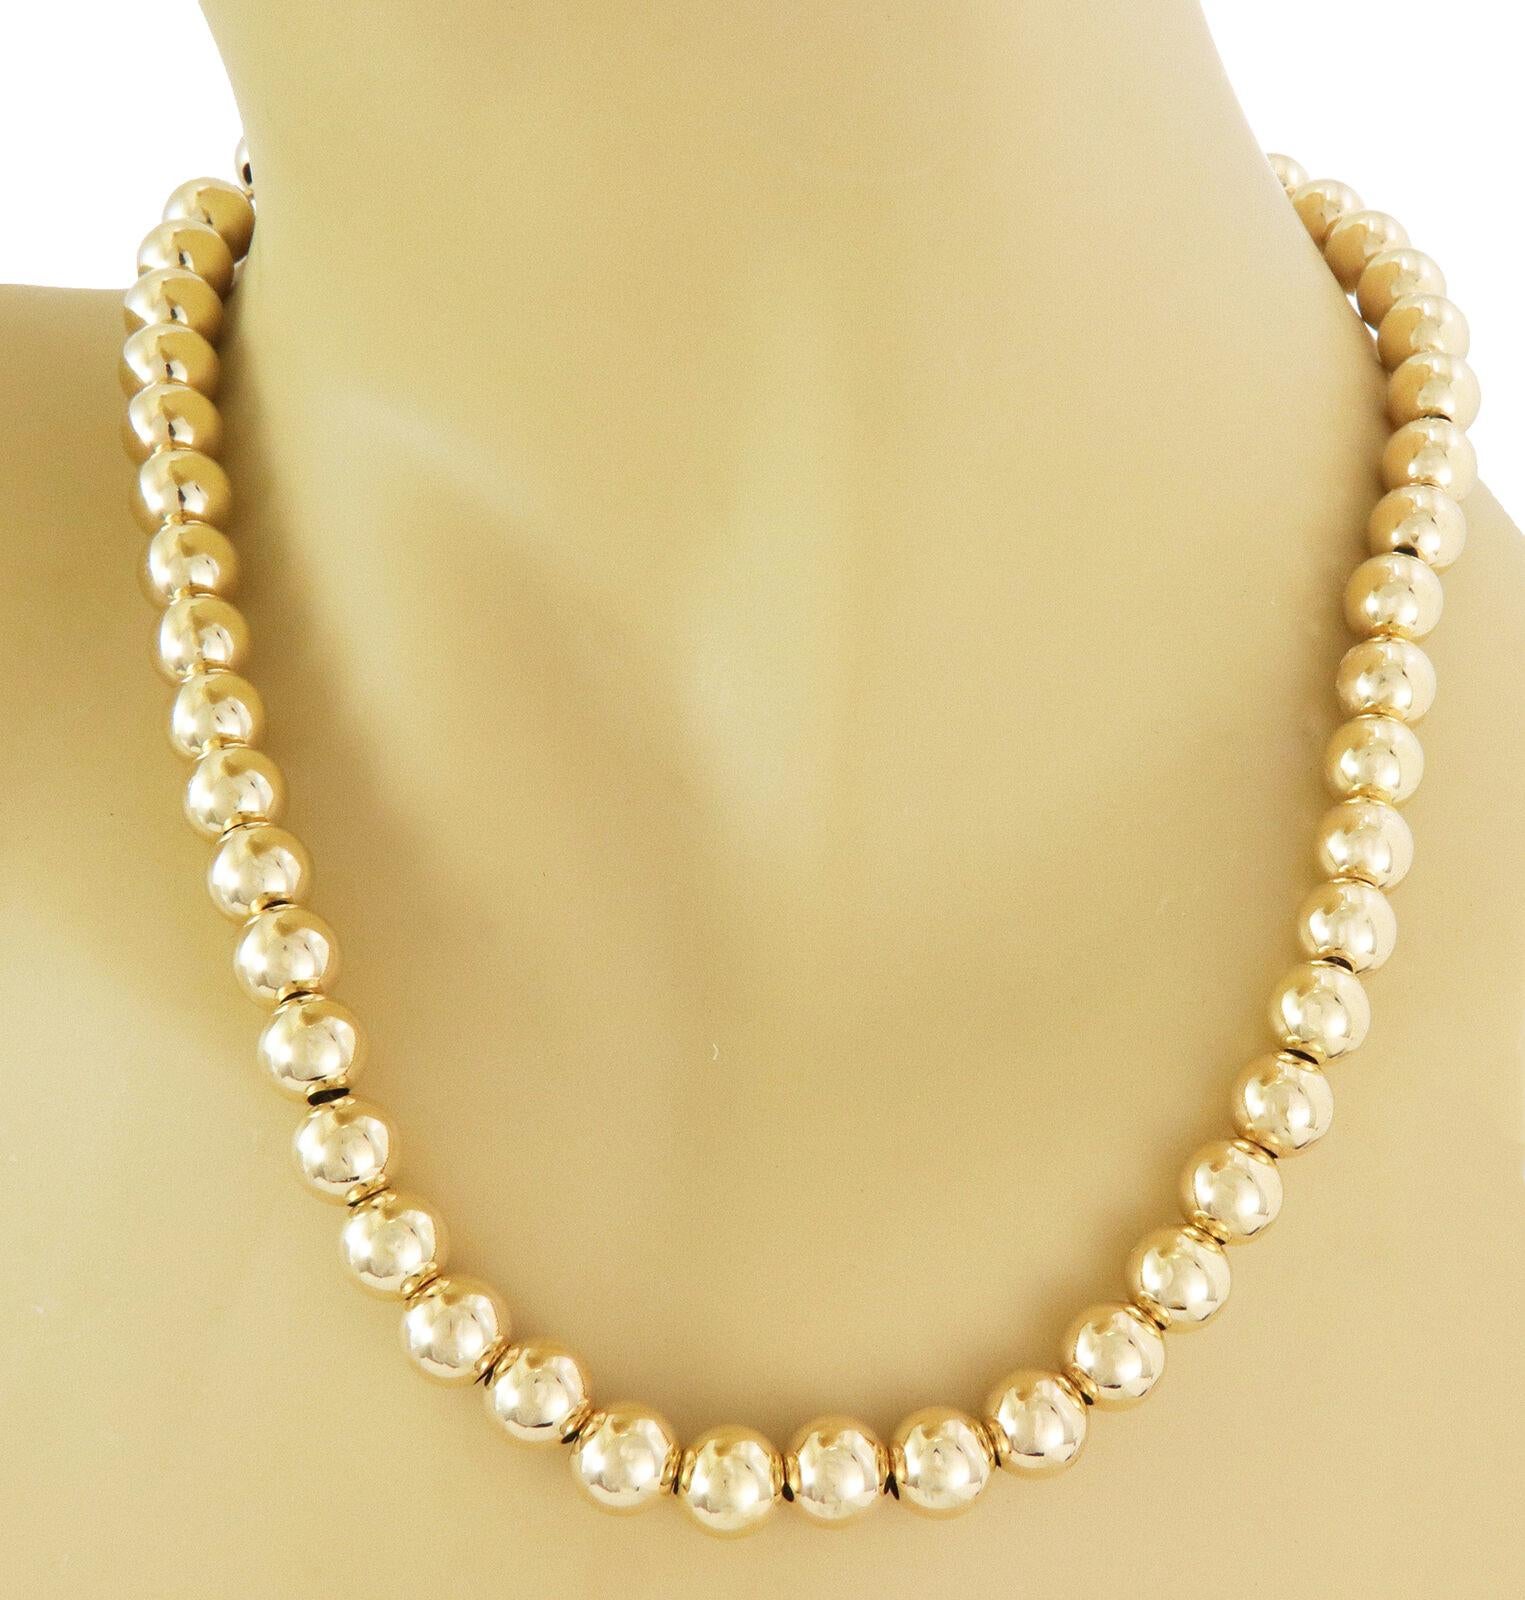 Vintage 14k Yellow Gold 9mm Beaded Necklace For Sale 3